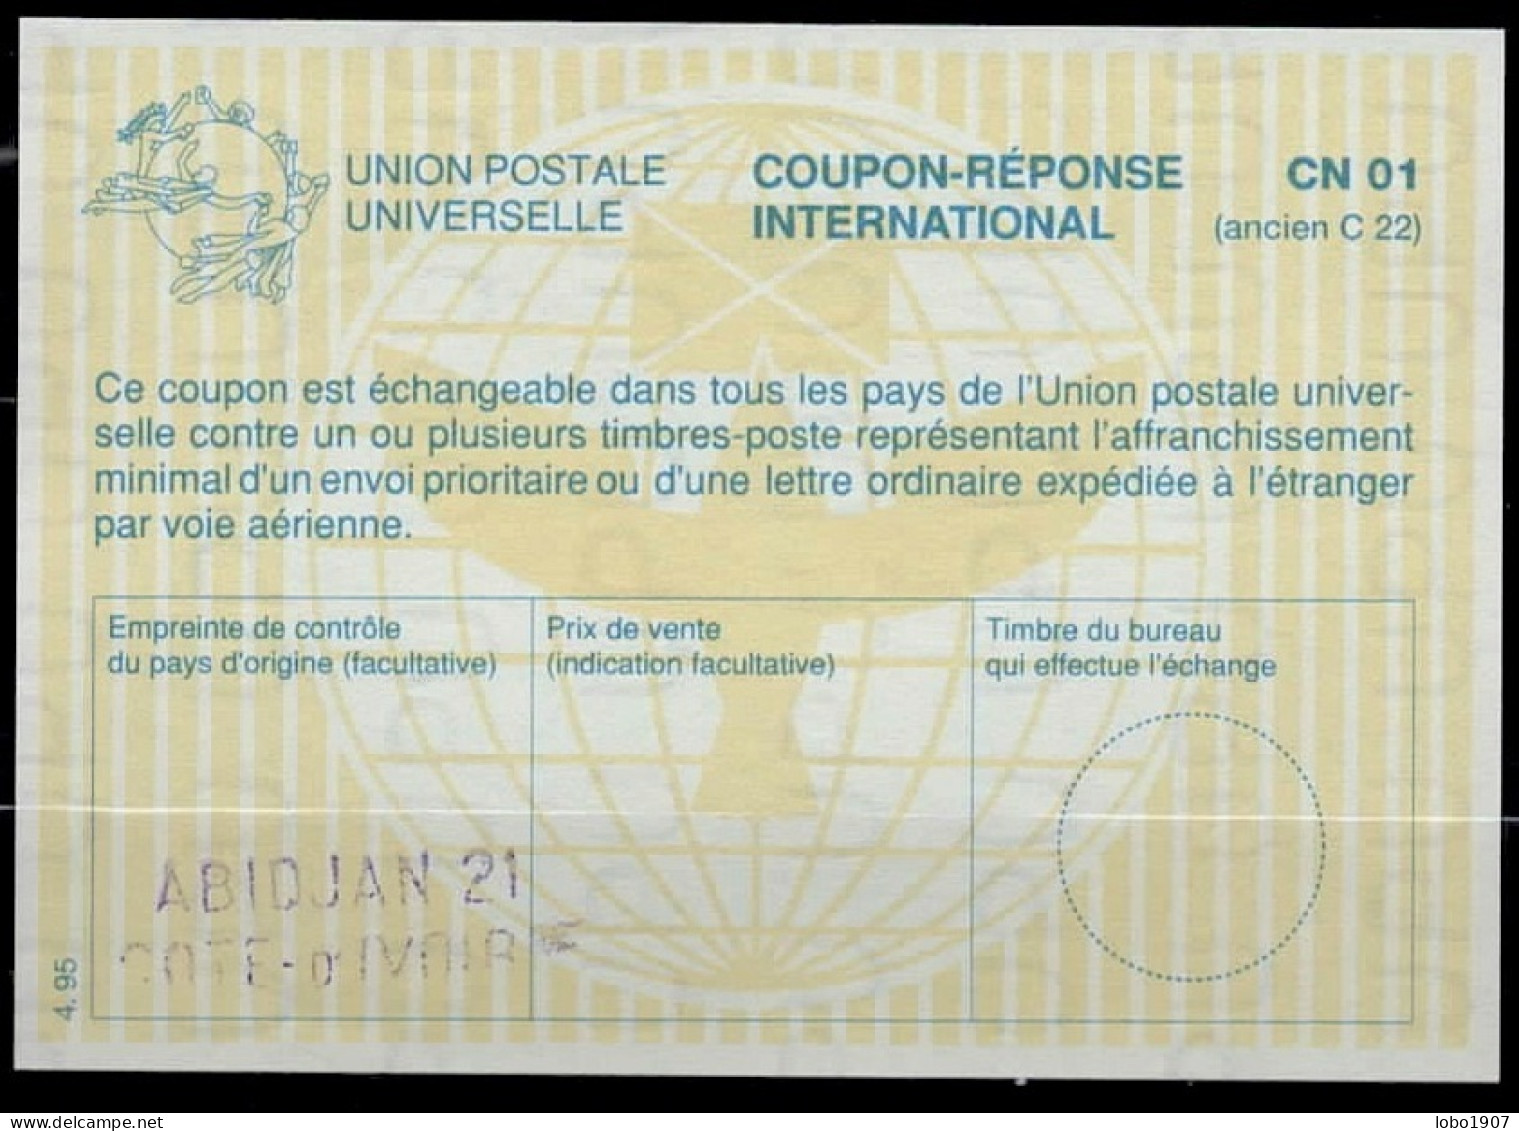 CÔTE D'IVOIRE IVORY COAST  La29  Int. Reply Coupon Reponse Antwortschein IRC IAS O Violet ABIDJAN 21 / CÔTE D'IVOIRE - Côte D'Ivoire (1960-...)